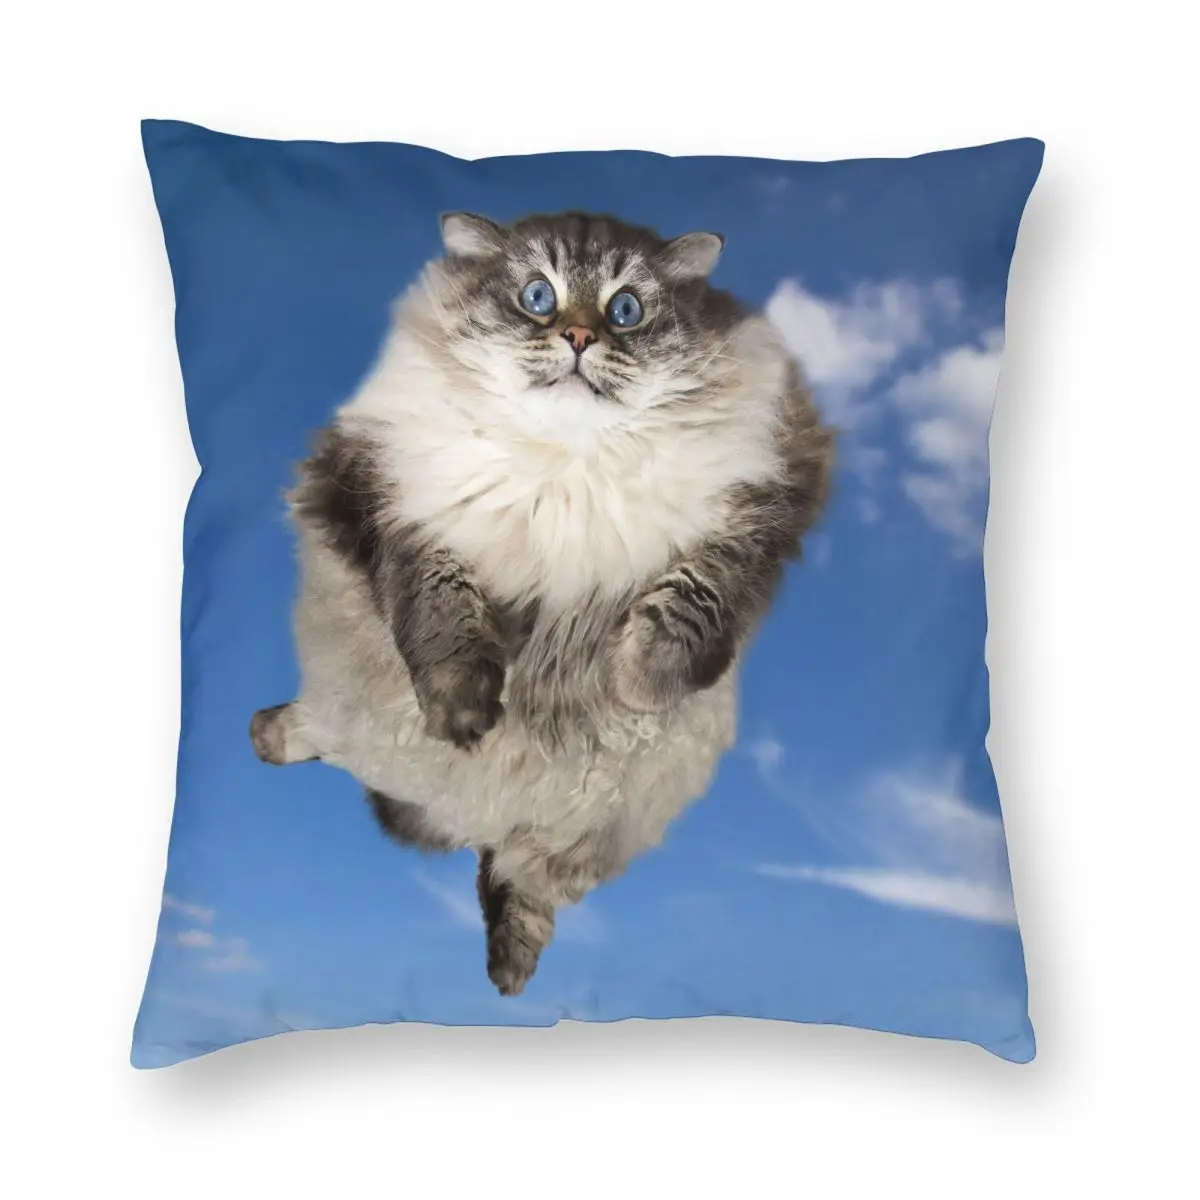 

Funny Cat Flying In The Clouds Blue Sky Pillowcase Soft Polyester Cushion Cover Gift Pillow Case Cover Car Zippered 45X45cm